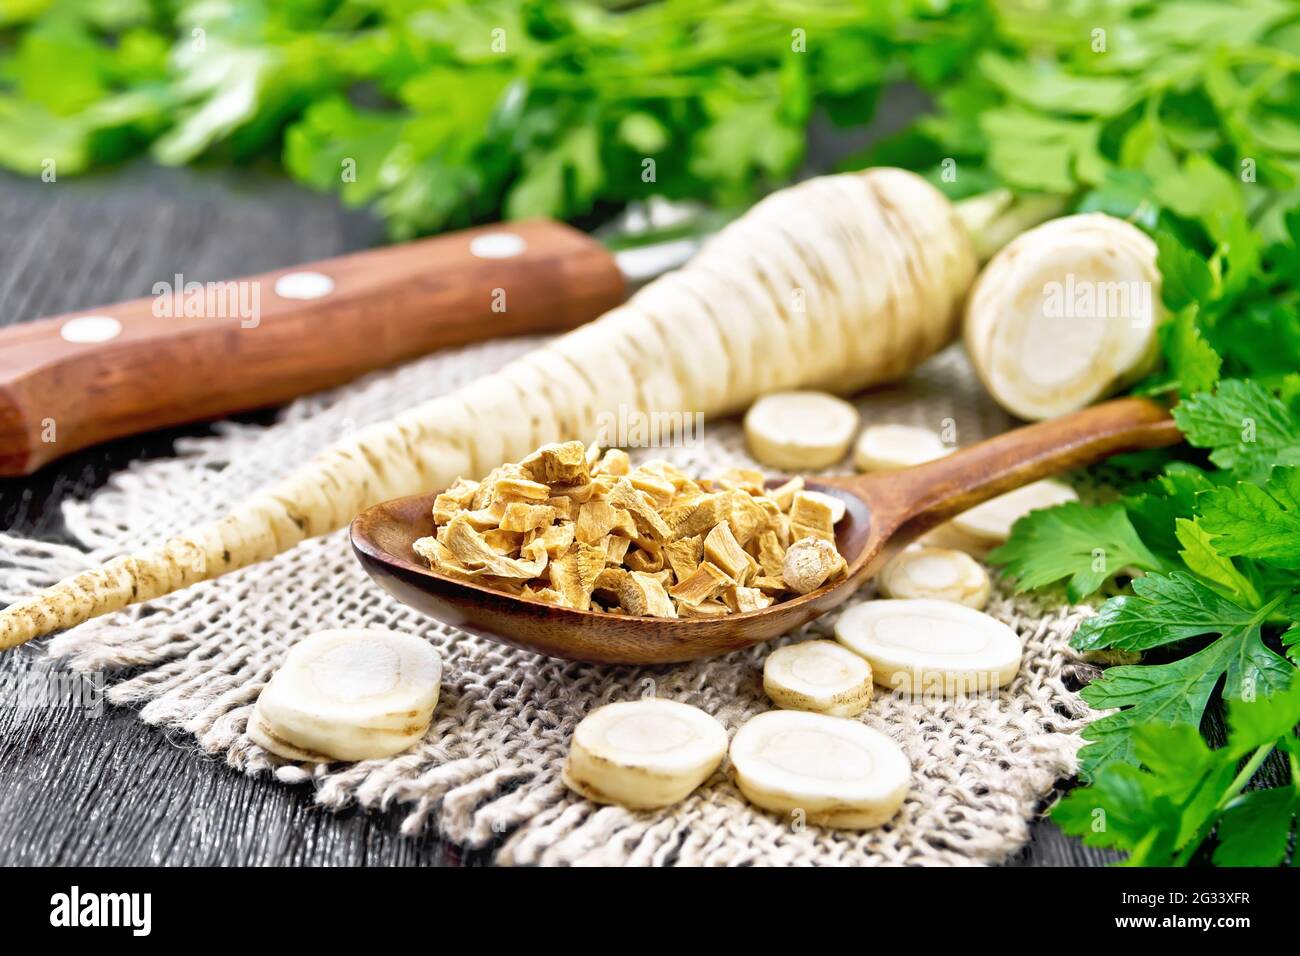 Fresh whole and chopped parsley roots with green tops, dried root in a spoon on burlap napkin, a knife on wooden board background Stock Photo